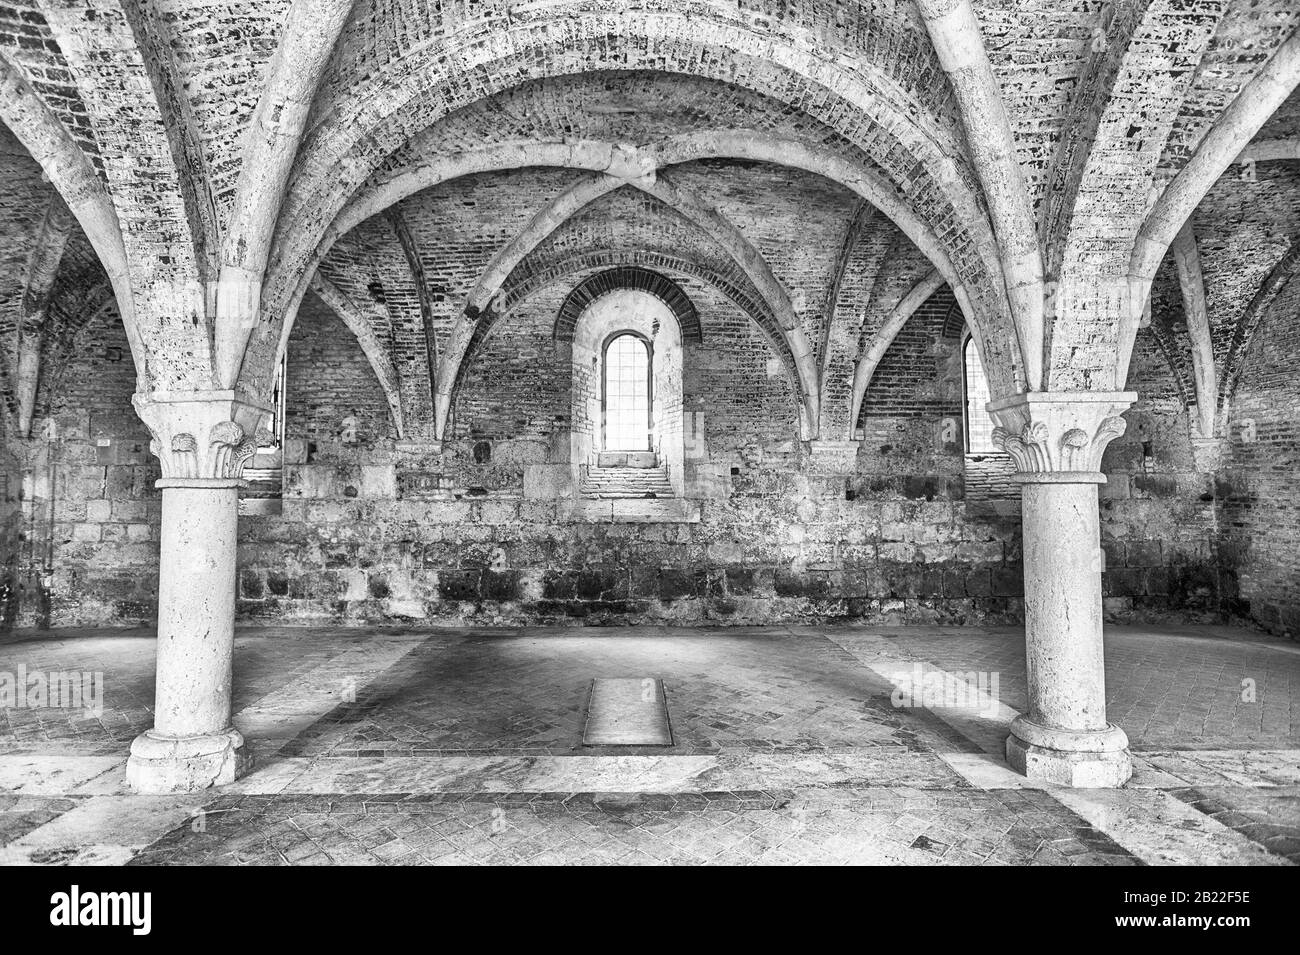 CHIUSDINO, ITALY - JUNE 22: Interior view of the iconic roofless Abbey of San Galgano, a Cistercian Monastery in the town of Chiusdino, province of Si Stock Photo